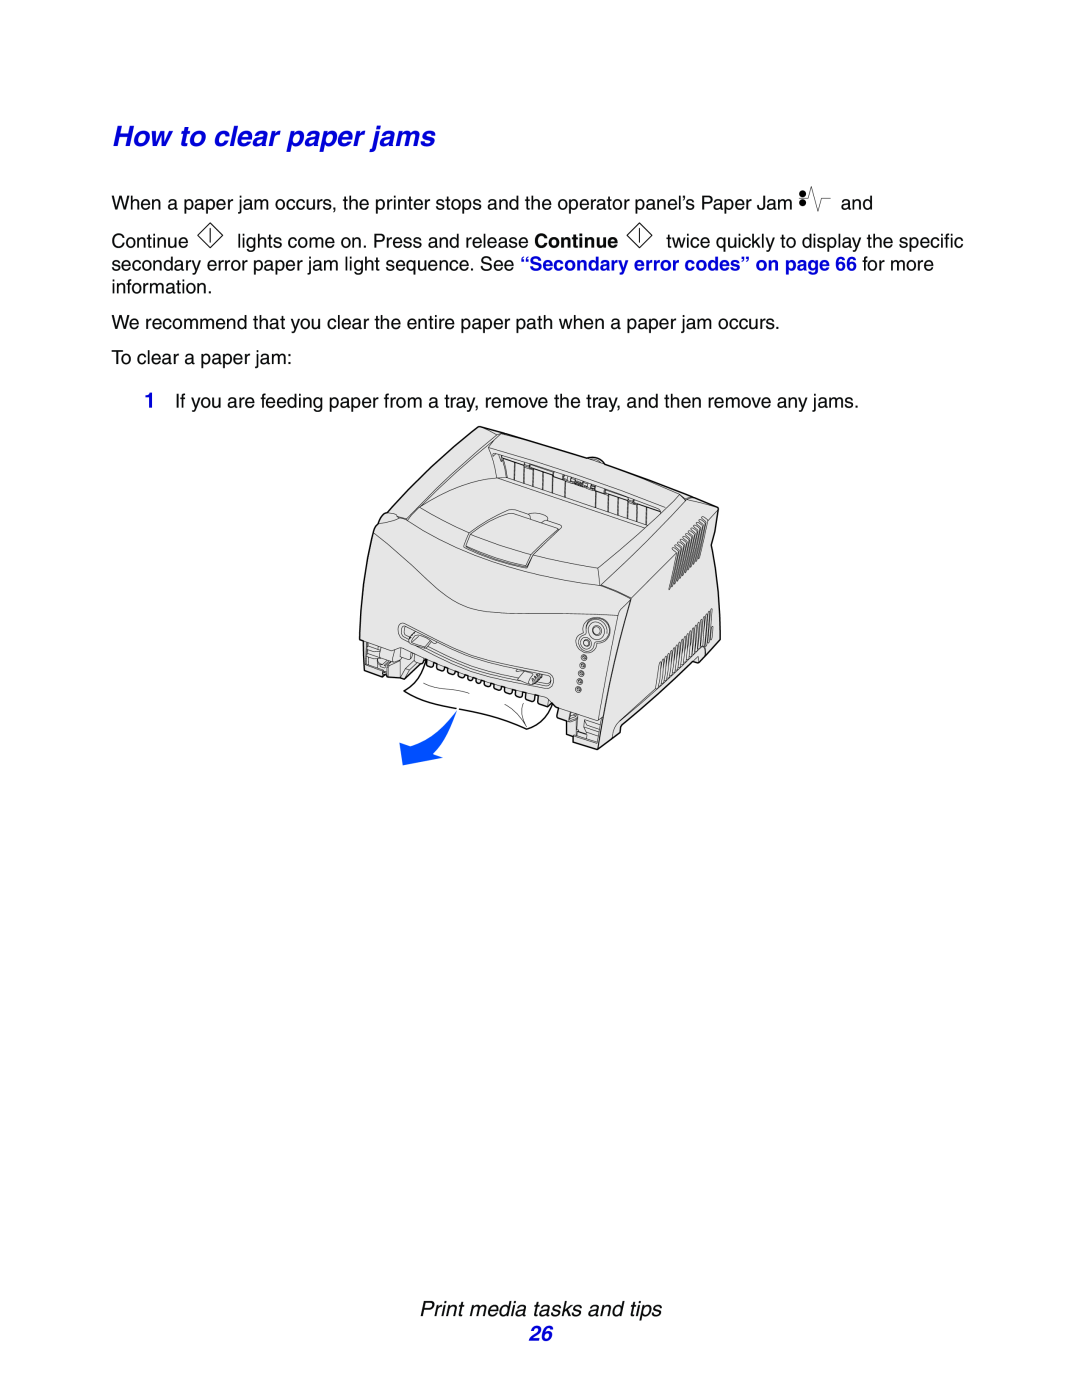 Lexmark E234N manual How to clear paper jams, Print media tasks and tips 